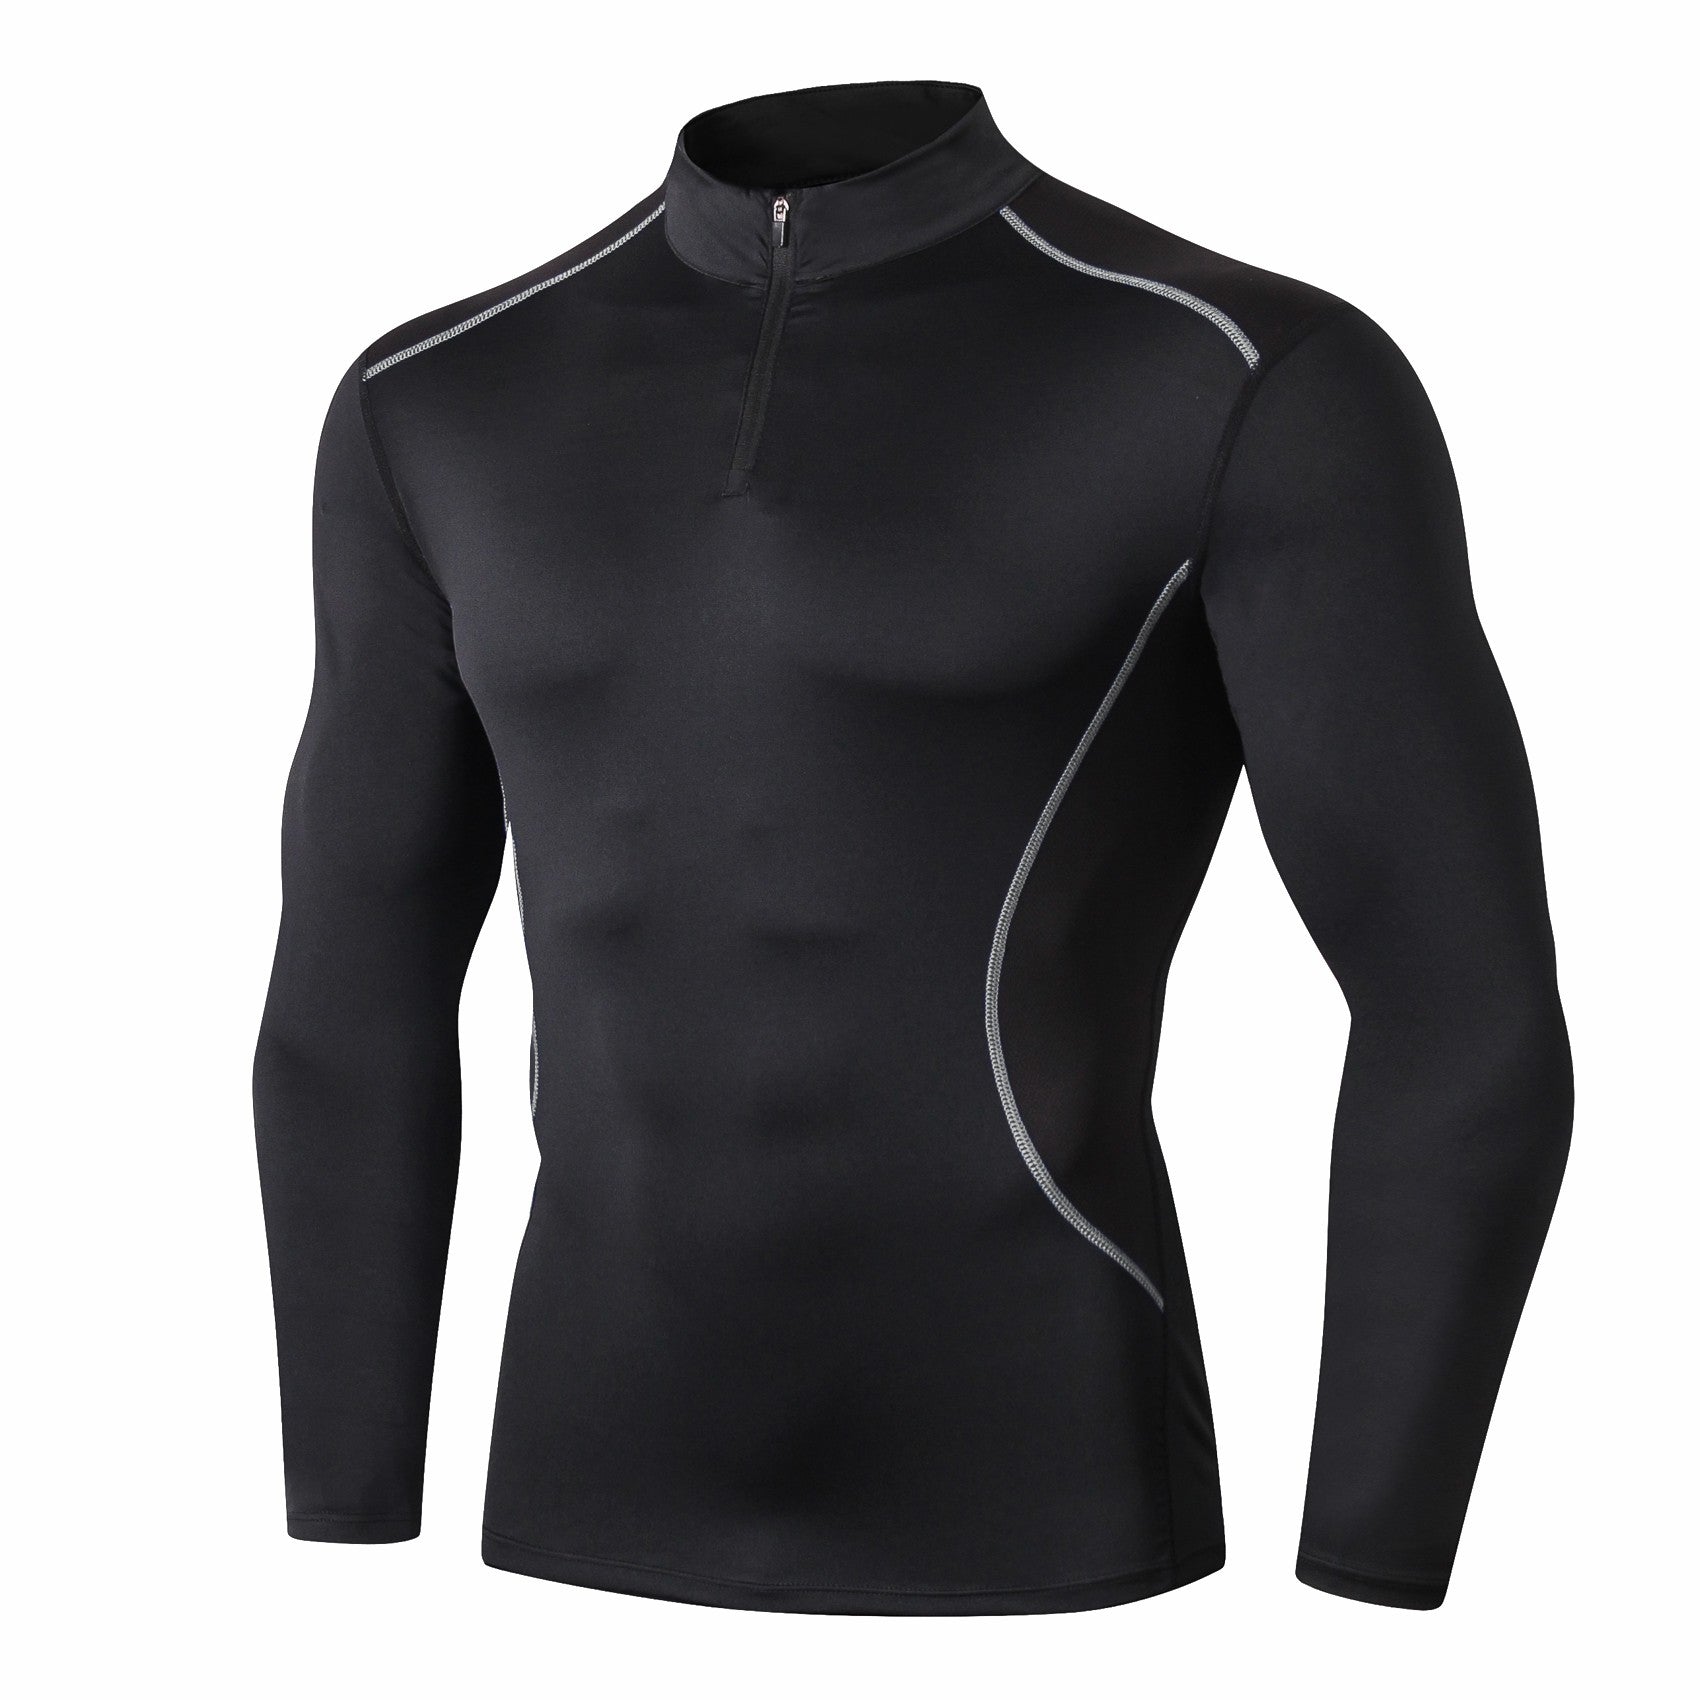 Buy Mens Compression Shirts Long Sleeve, Quick Dry Base Layer Thermal  Workout T-Shirts, Athletic Turtleneck Running Tops Black at